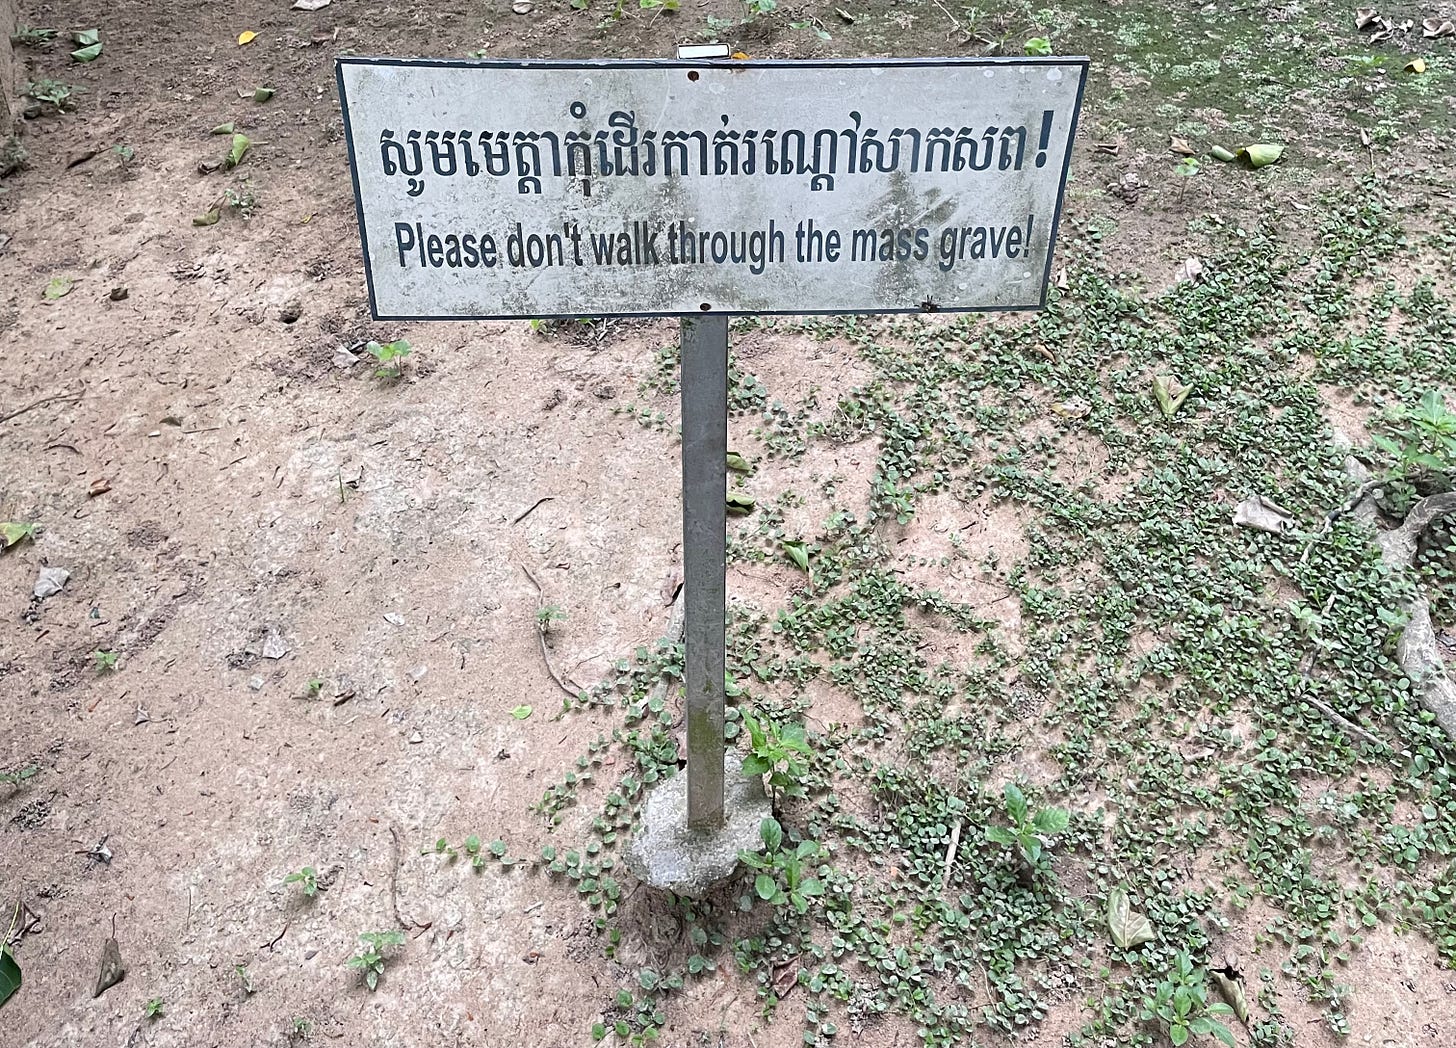 A sign at the Killing Fields that reads "Please don't walk through the mass grave!" in Khmer on top and English on bottom.